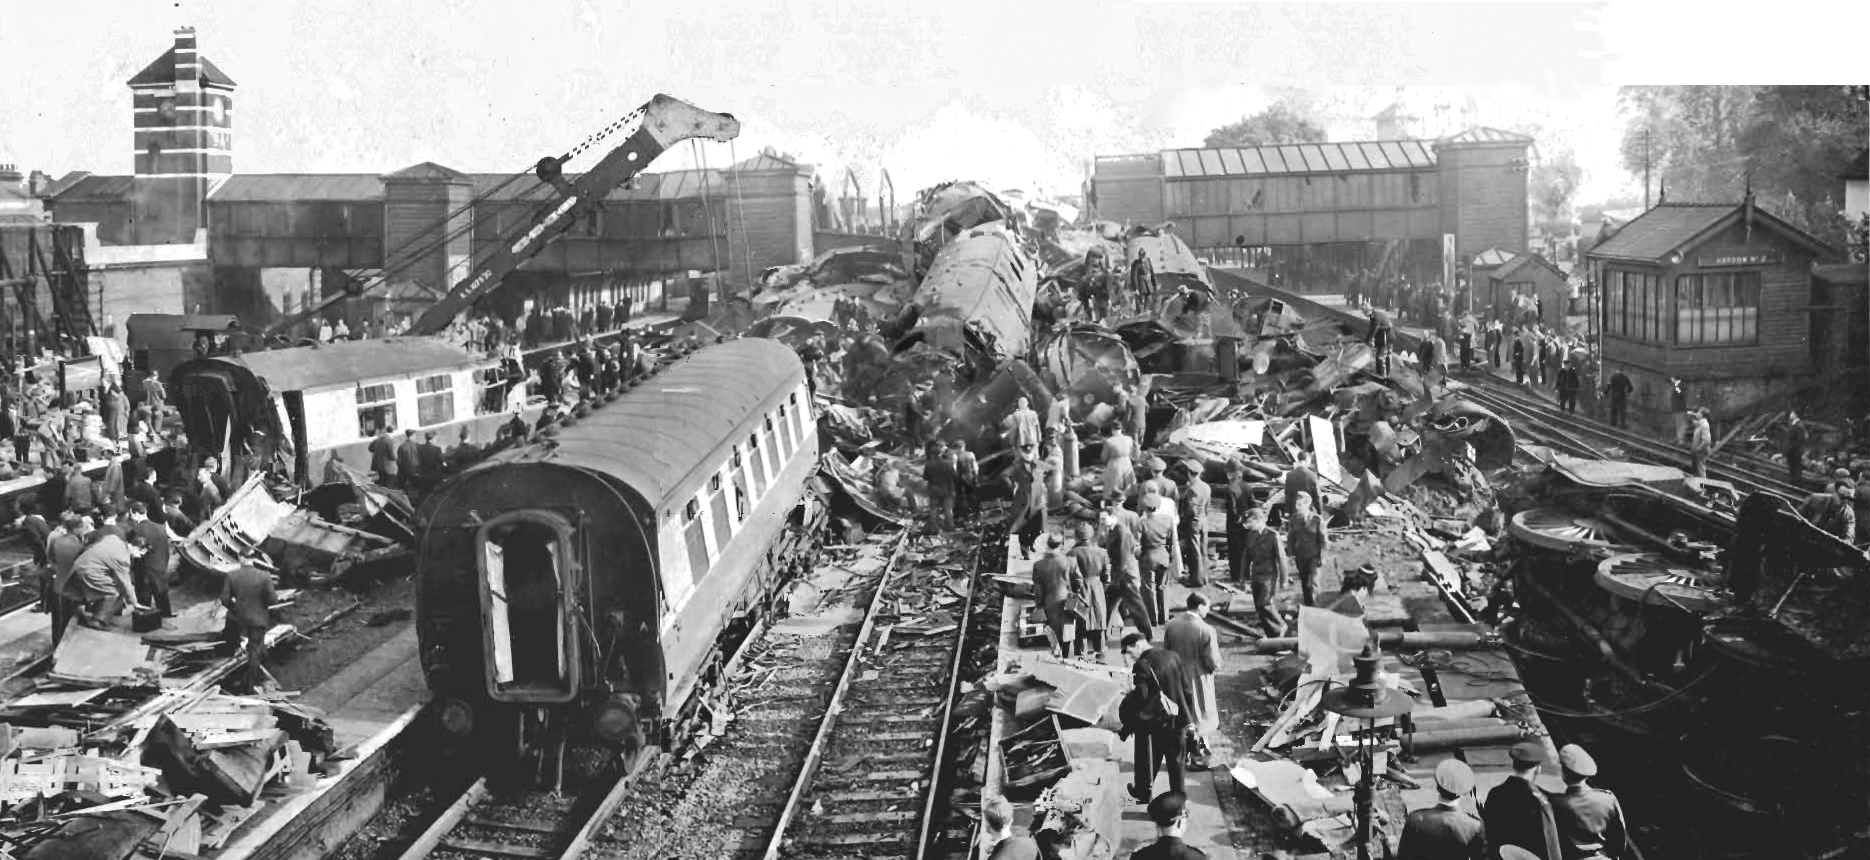 A view of the derailment looking towards london